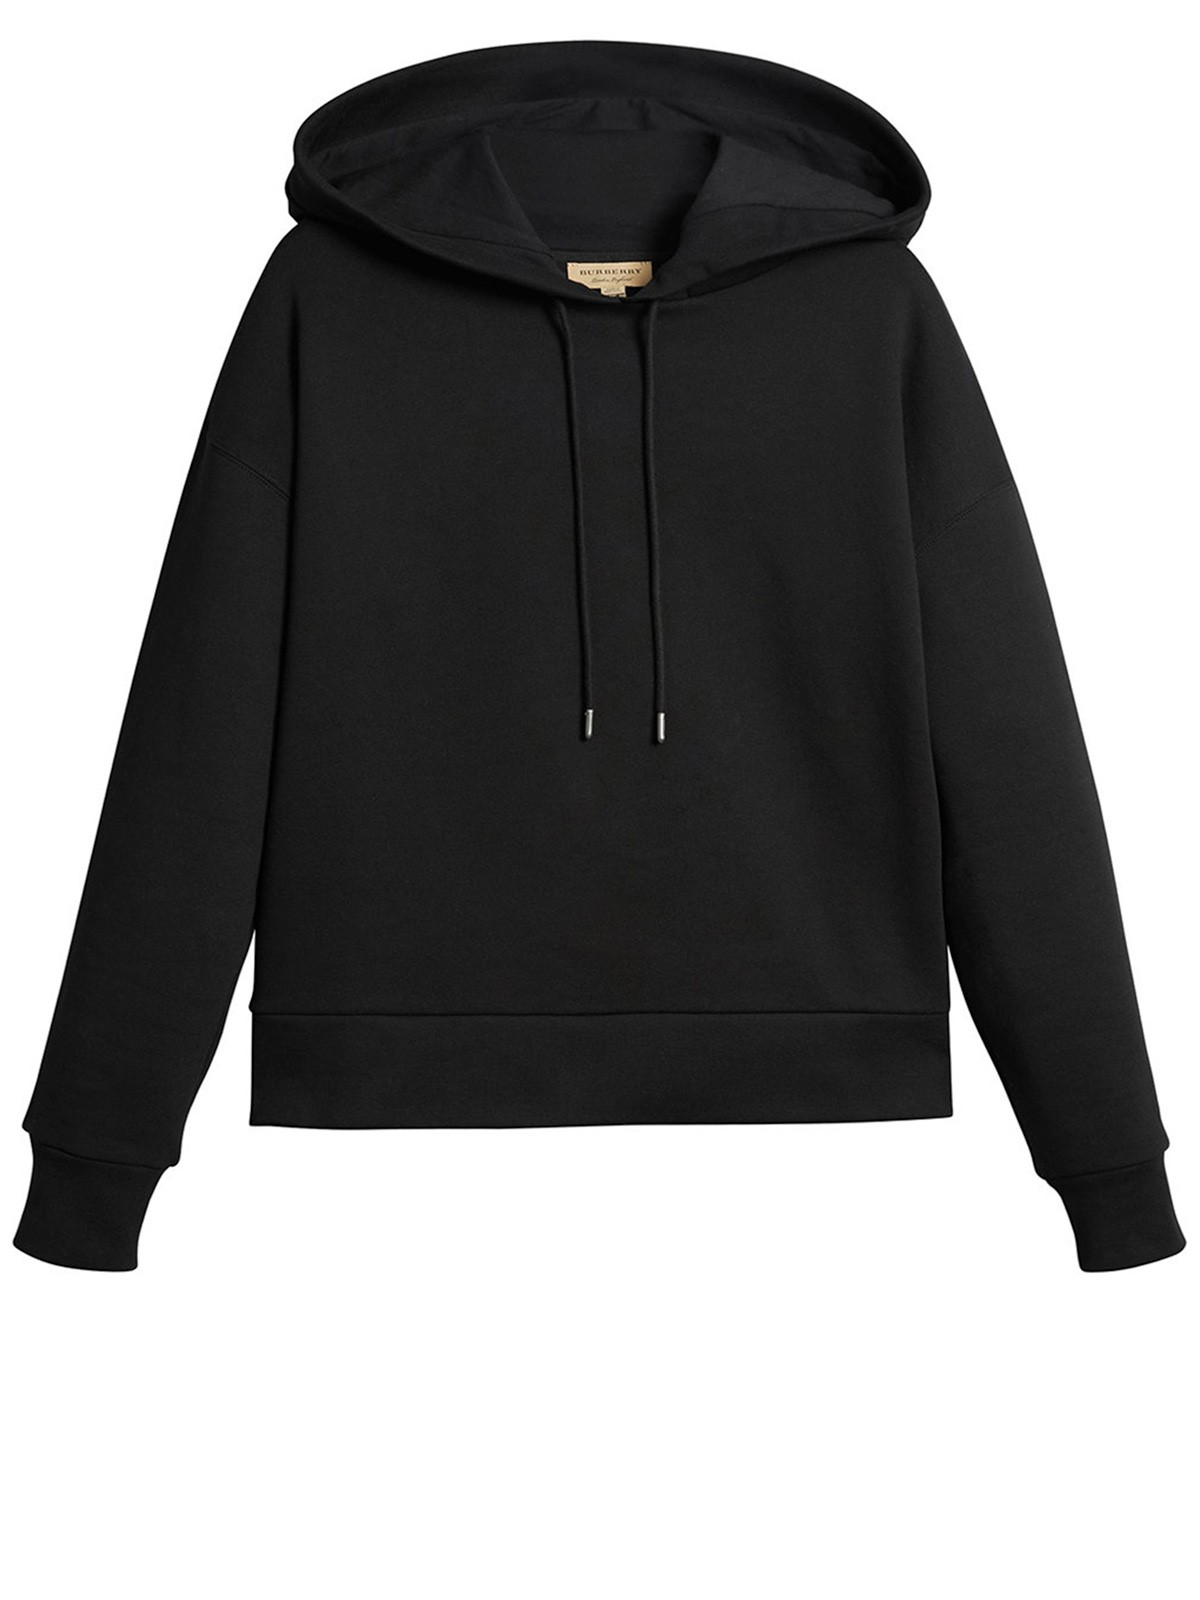 burberry EMBROIDERED HOODIE SWEATER available on montiboutique.com 